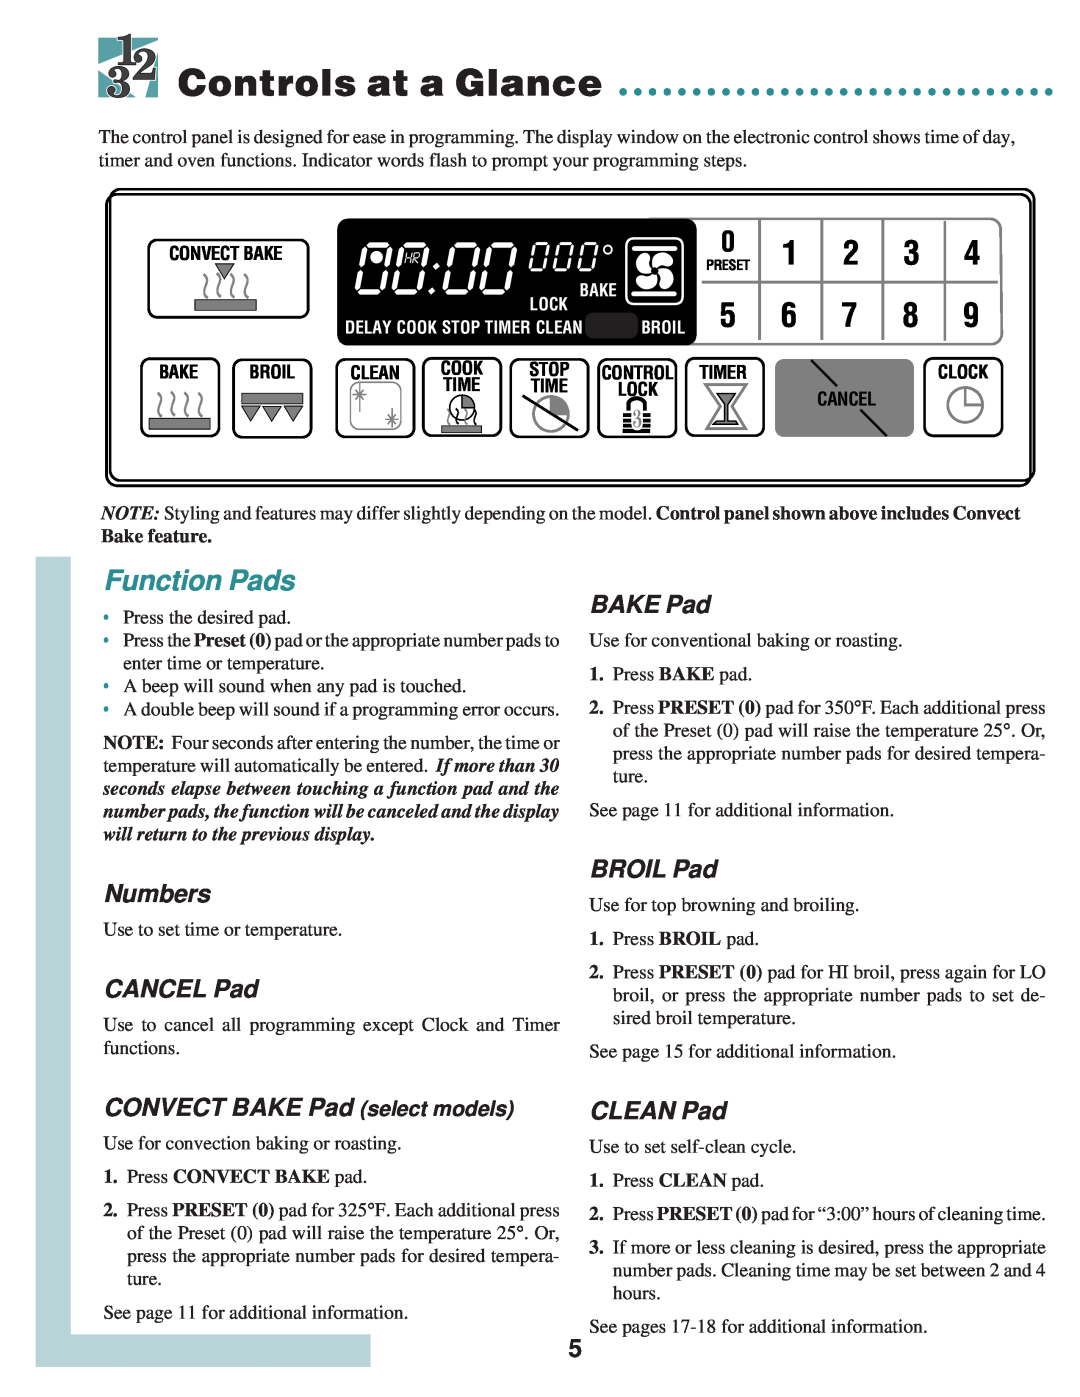 Maytag T2 warranty Controls at a Glance, Function Pads, Numbers, CANCEL Pad, BROIL Pad, CONVECT BAKE Pad select models 